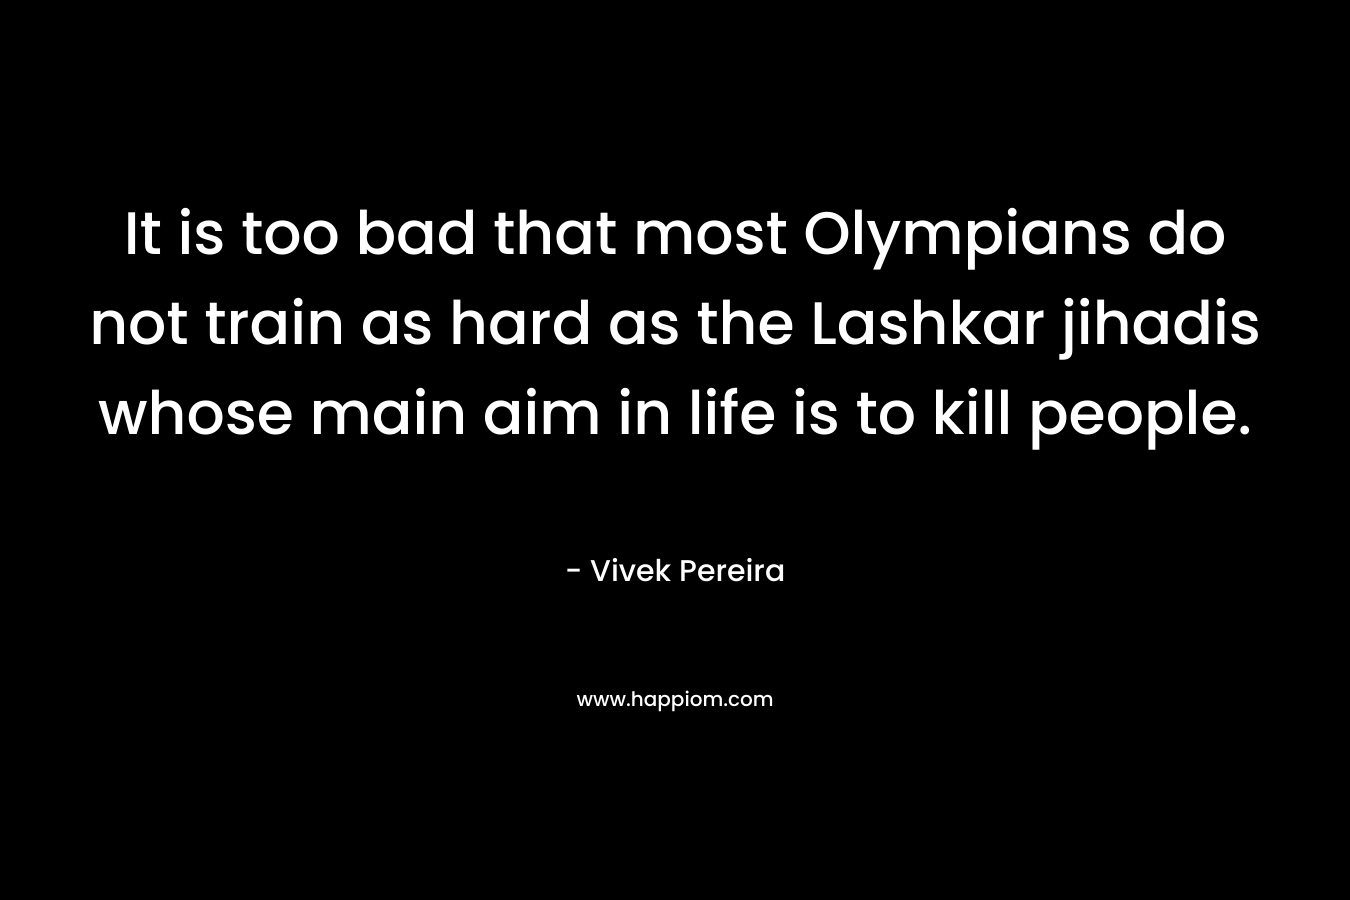 It is too bad that most Olympians do not train as hard as the Lashkar jihadis whose main aim in life is to kill people. – Vivek Pereira